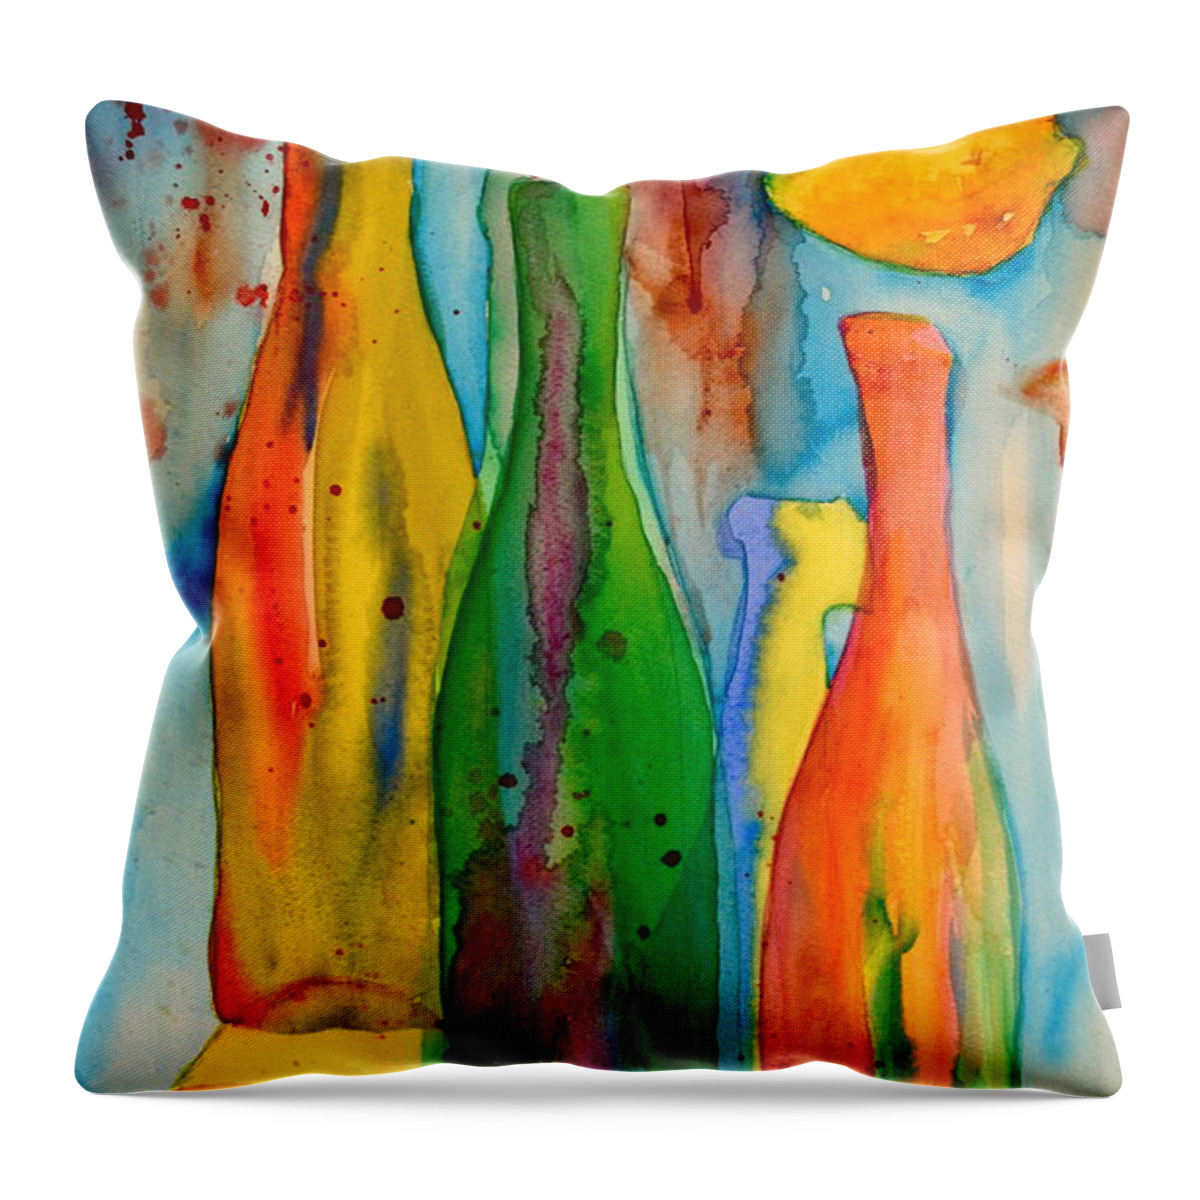 Bottle Throw Pillow featuring the painting Bottles And Lemons by Beverley Harper Tinsley